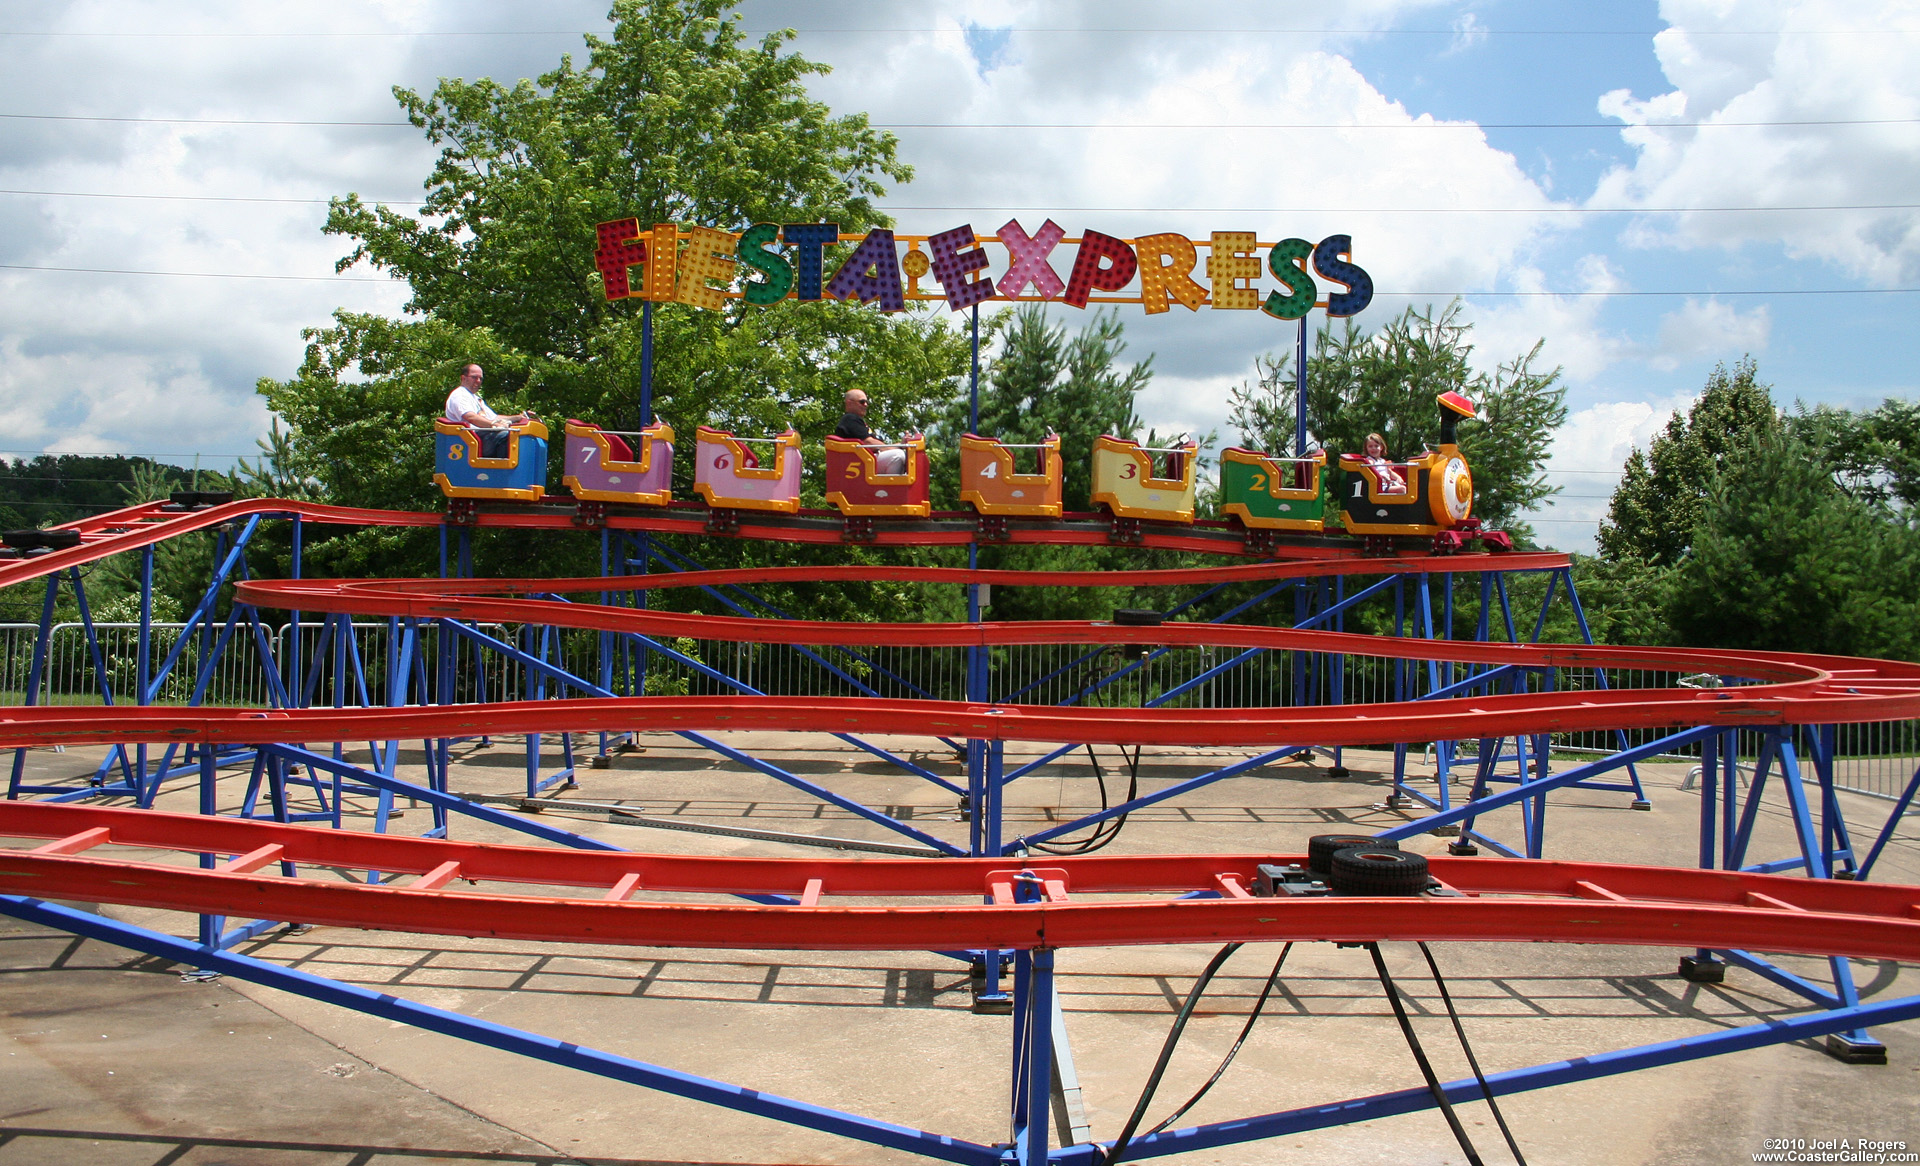 Roller coaster known as Fiesta Express or Mini-Mouse